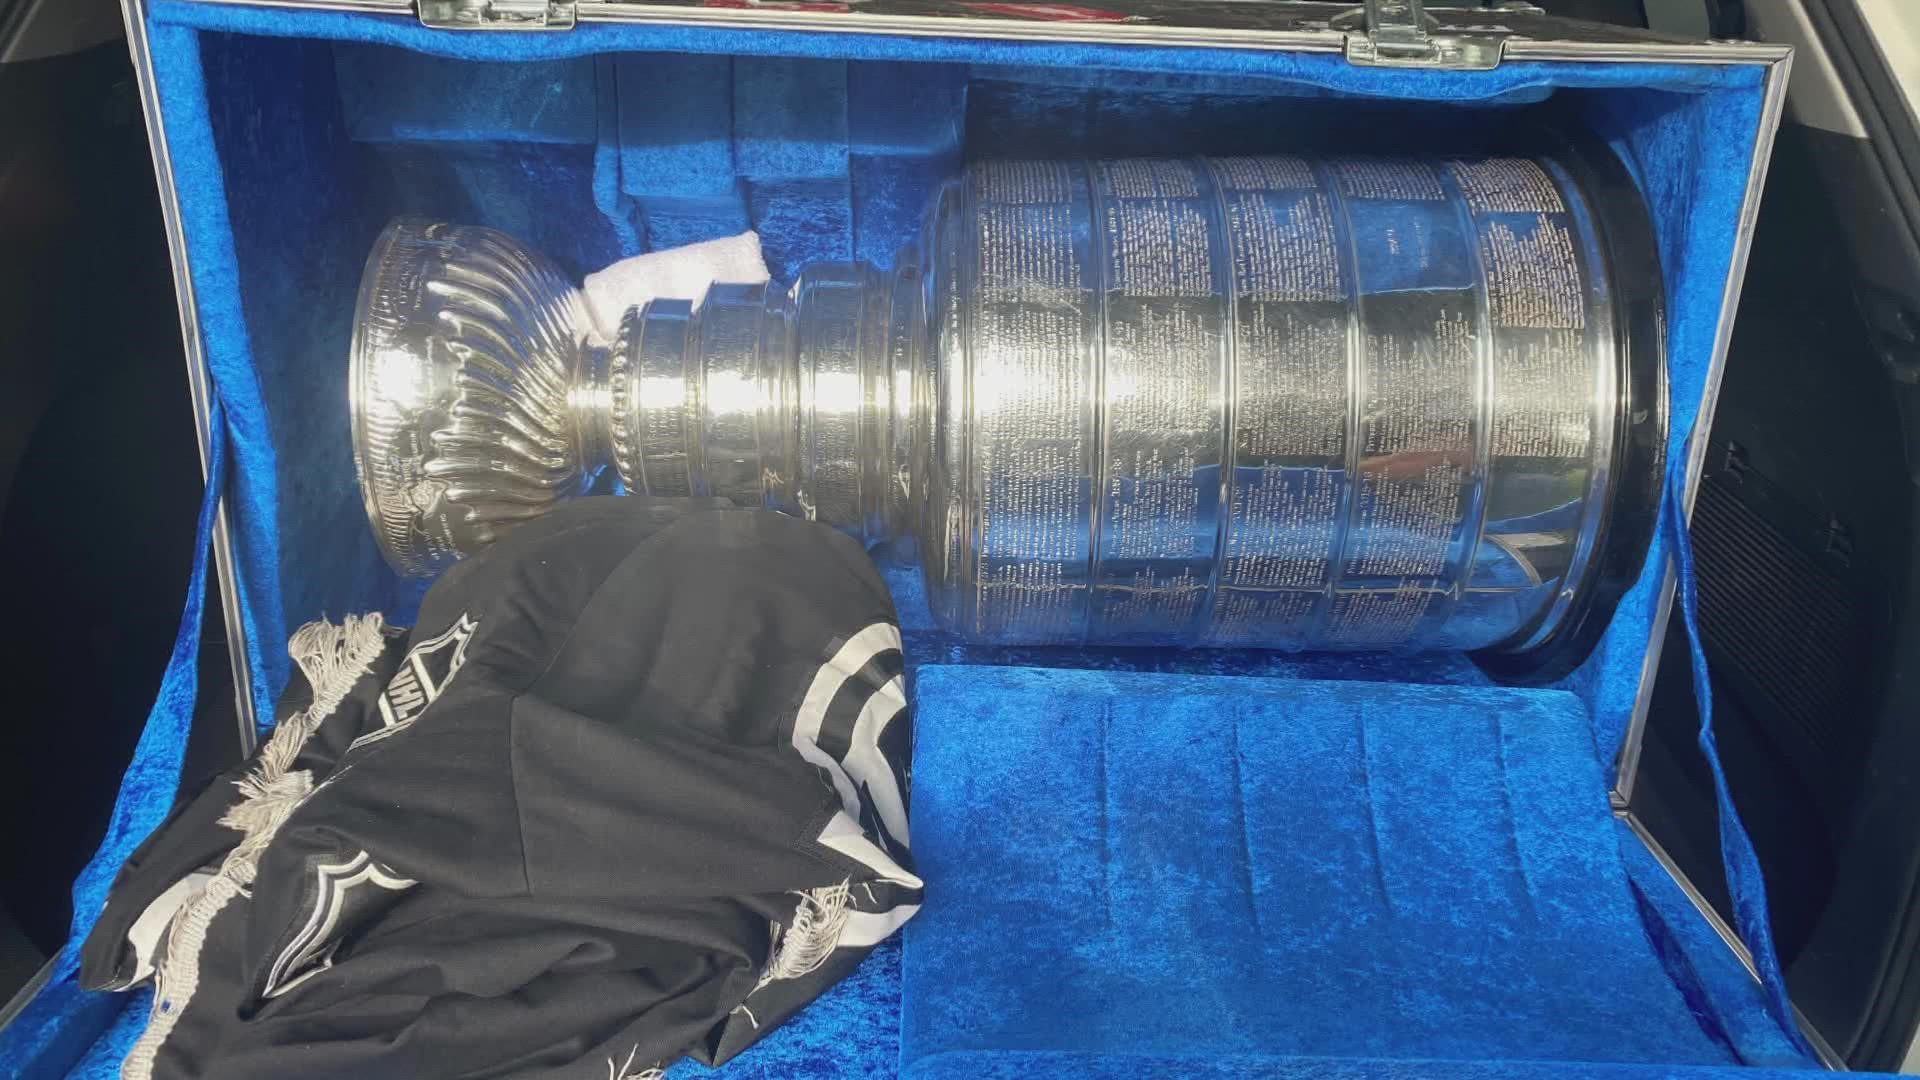 The Cup made an unscheduled stop Monday night, the day after the Colorado Avalanche defeated the Tampa Bay Lightning.